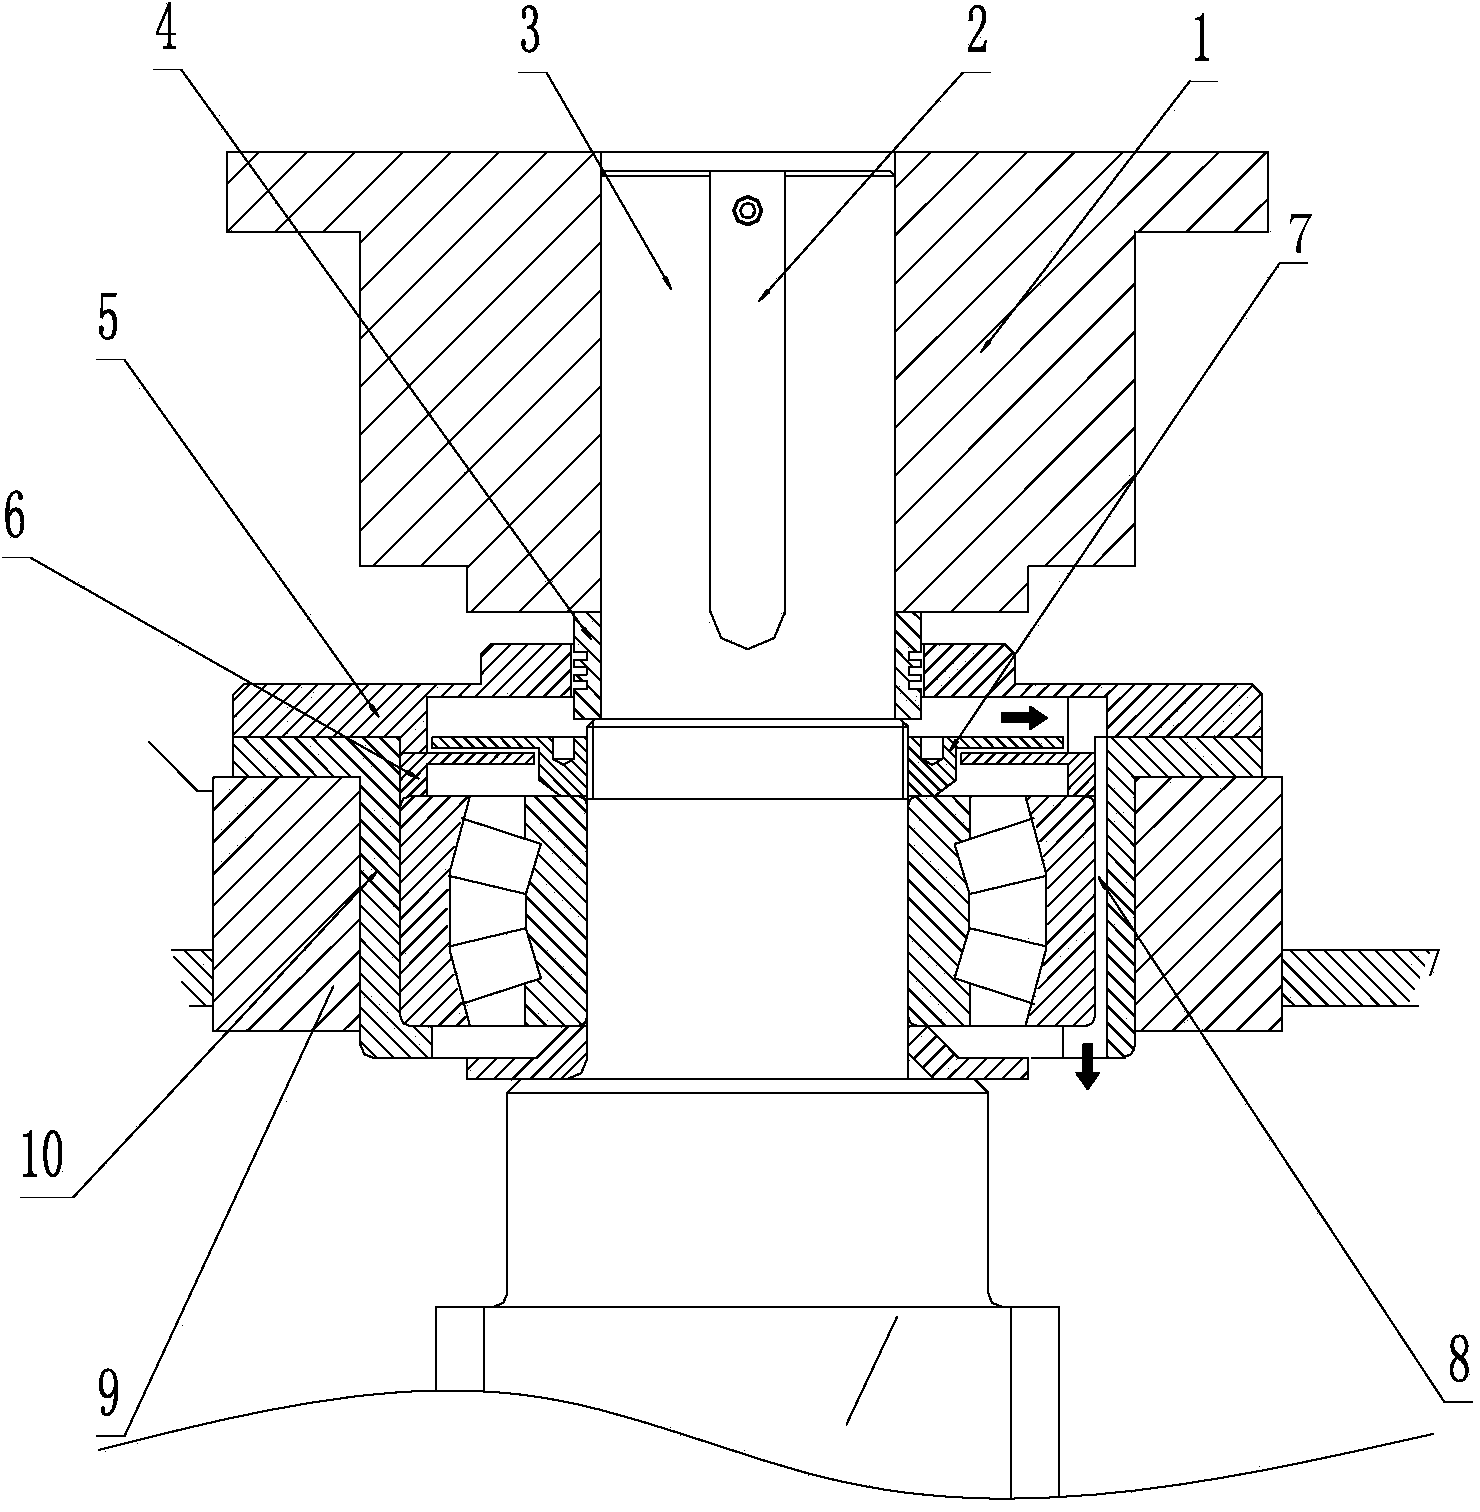 Non-contact seal device for high-speed shaft of gear speed reducer